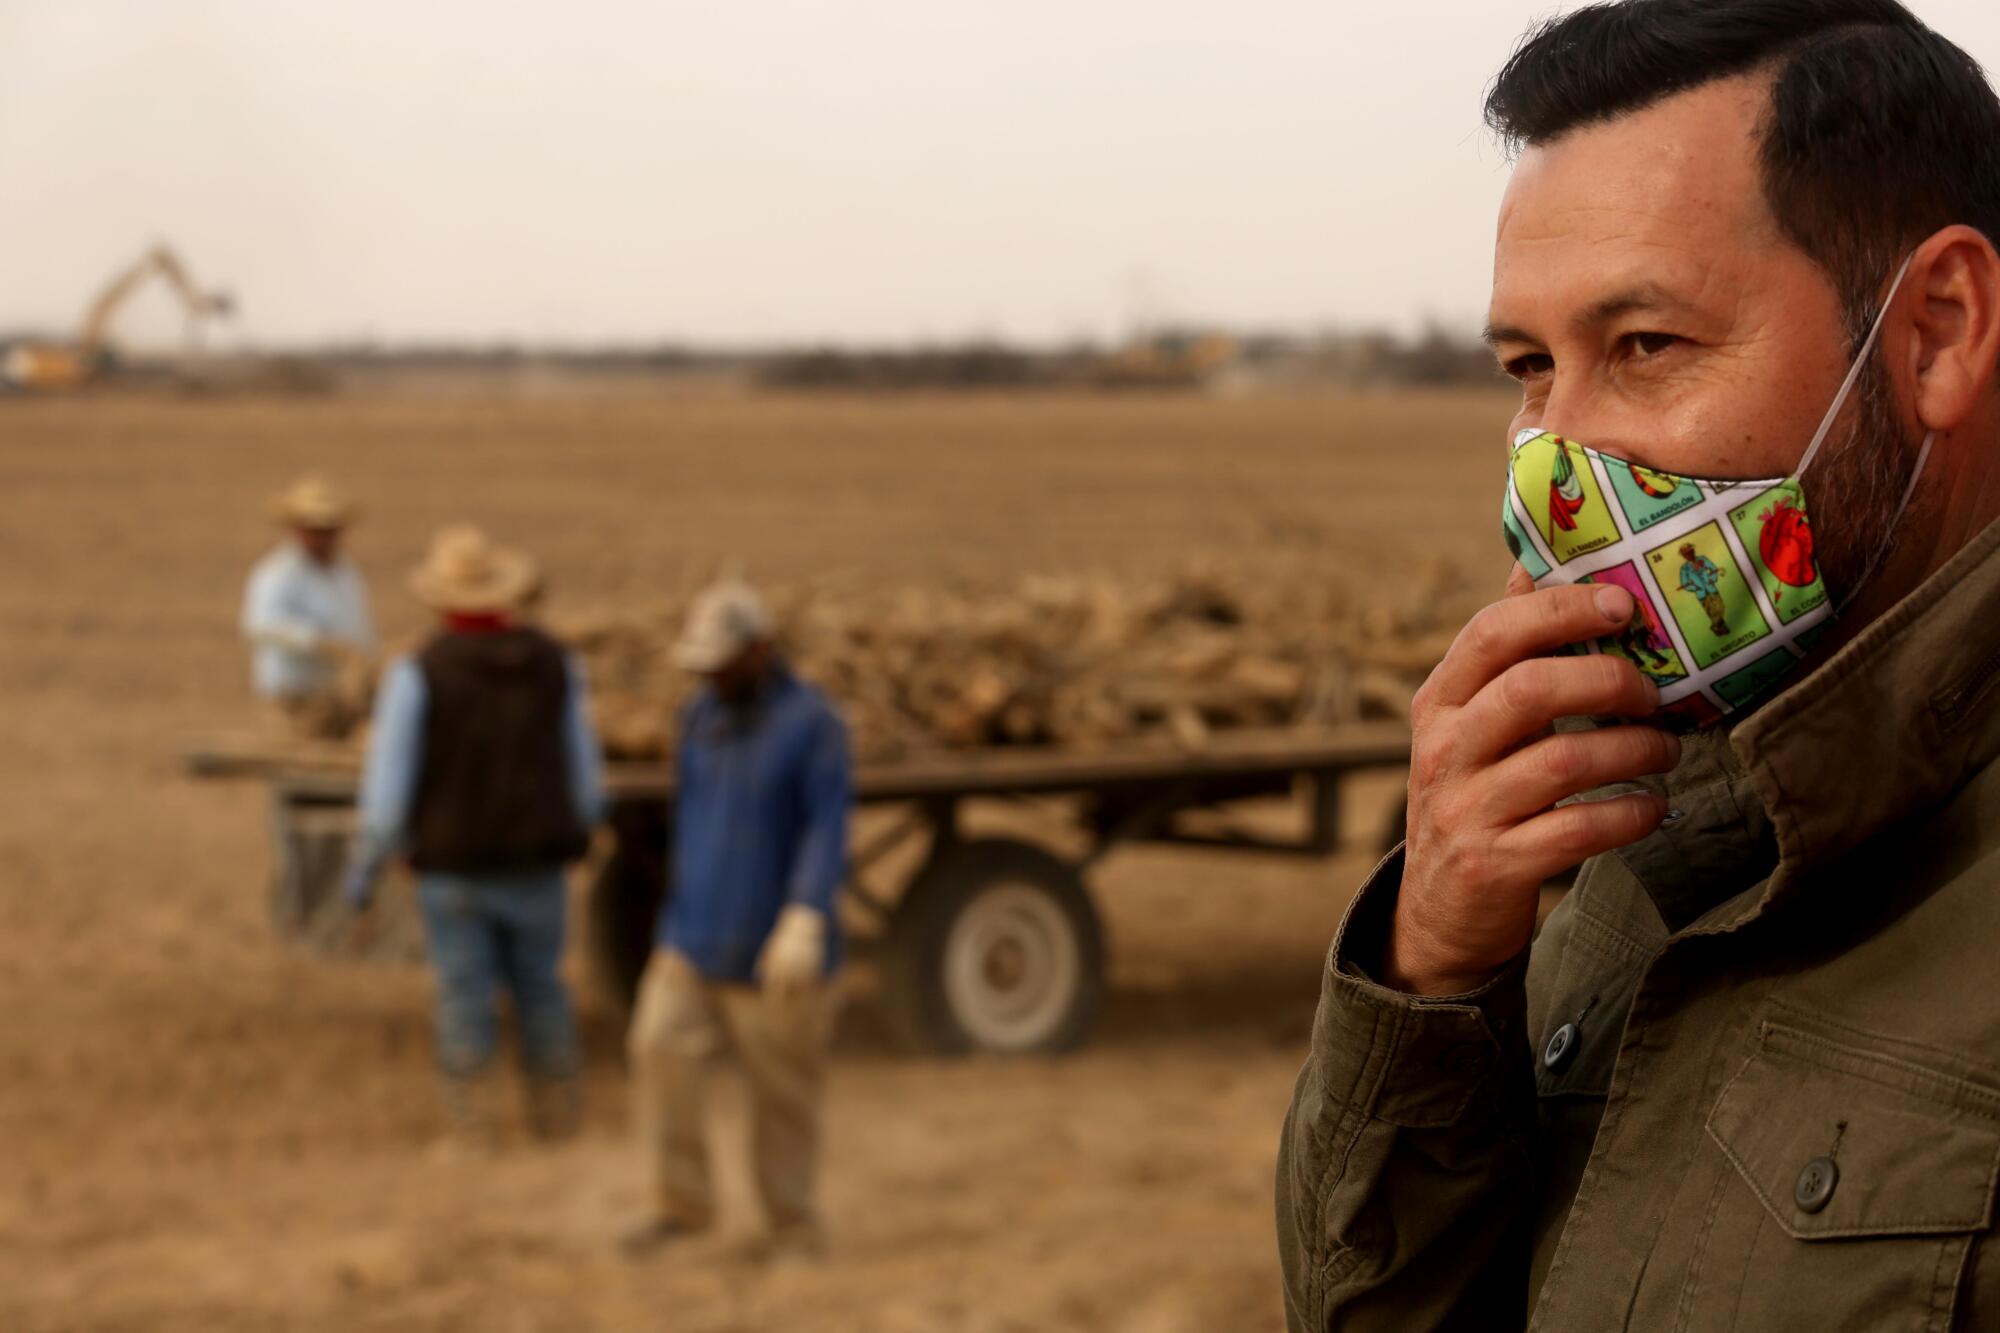 Ricardo Castorena stands with his hand touching his mask as farmworkers work in the background